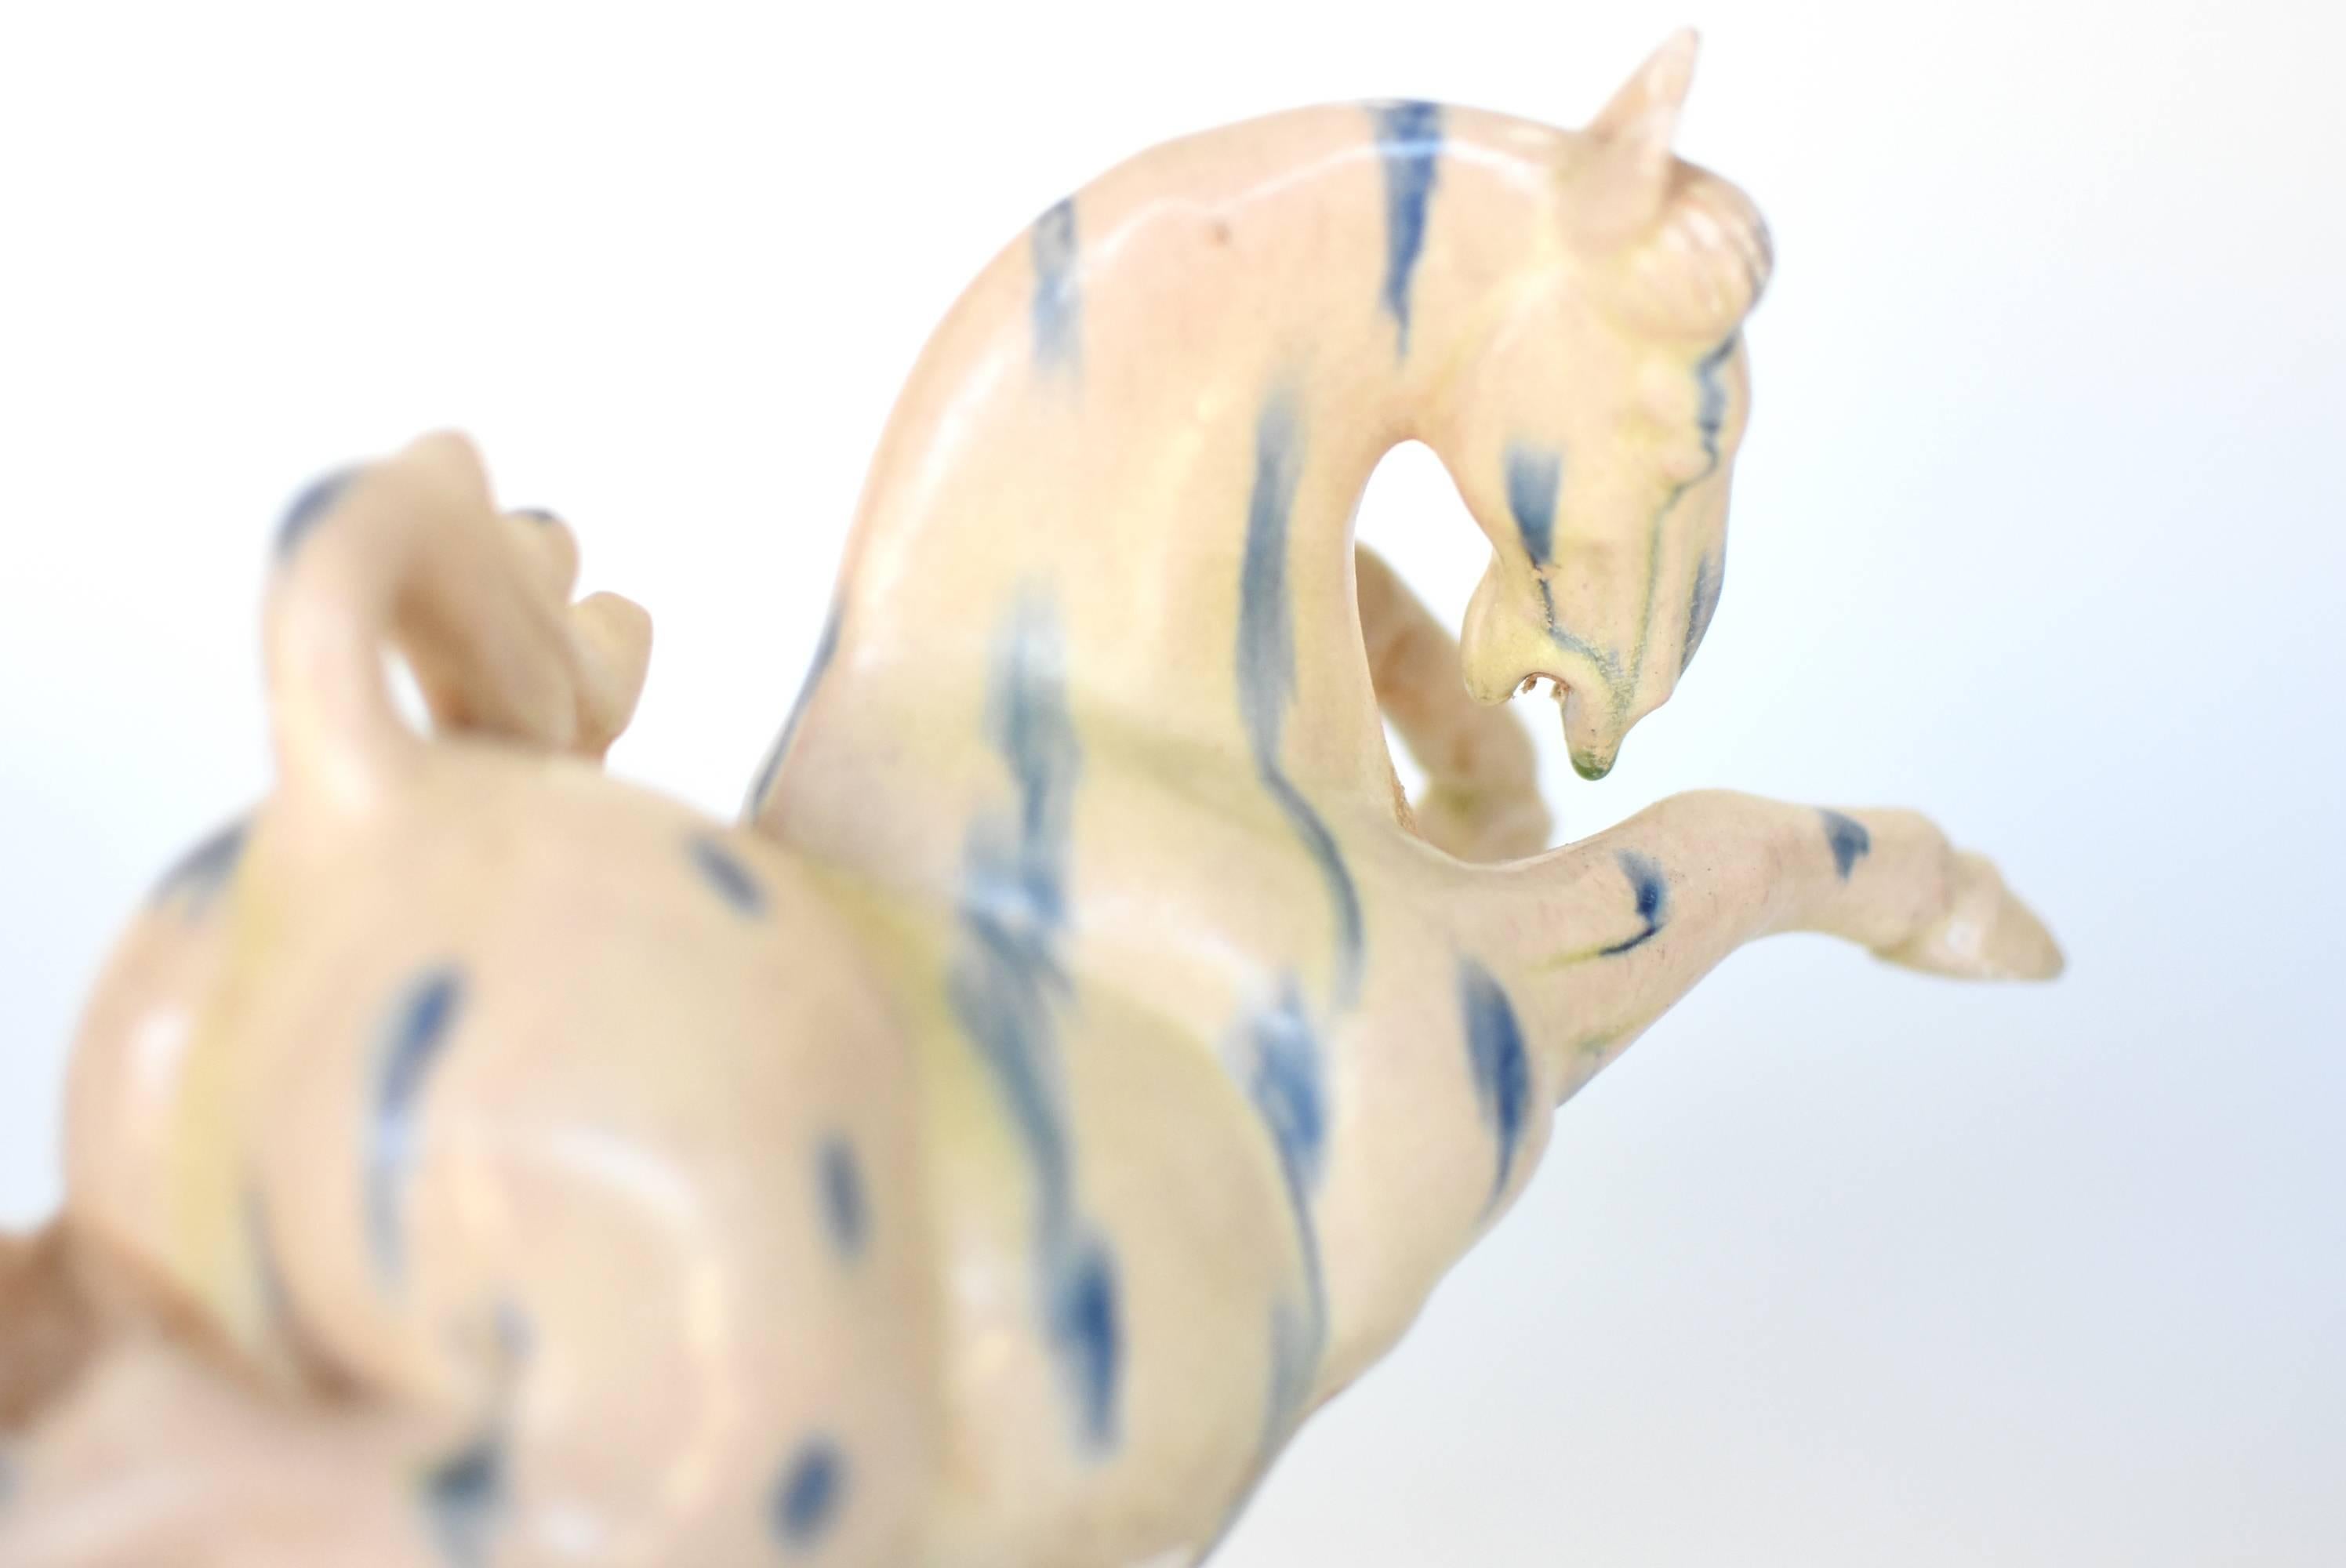 Set of 4 Large Pottery Horses, Chinese Terracotta with Blue Streaks 10